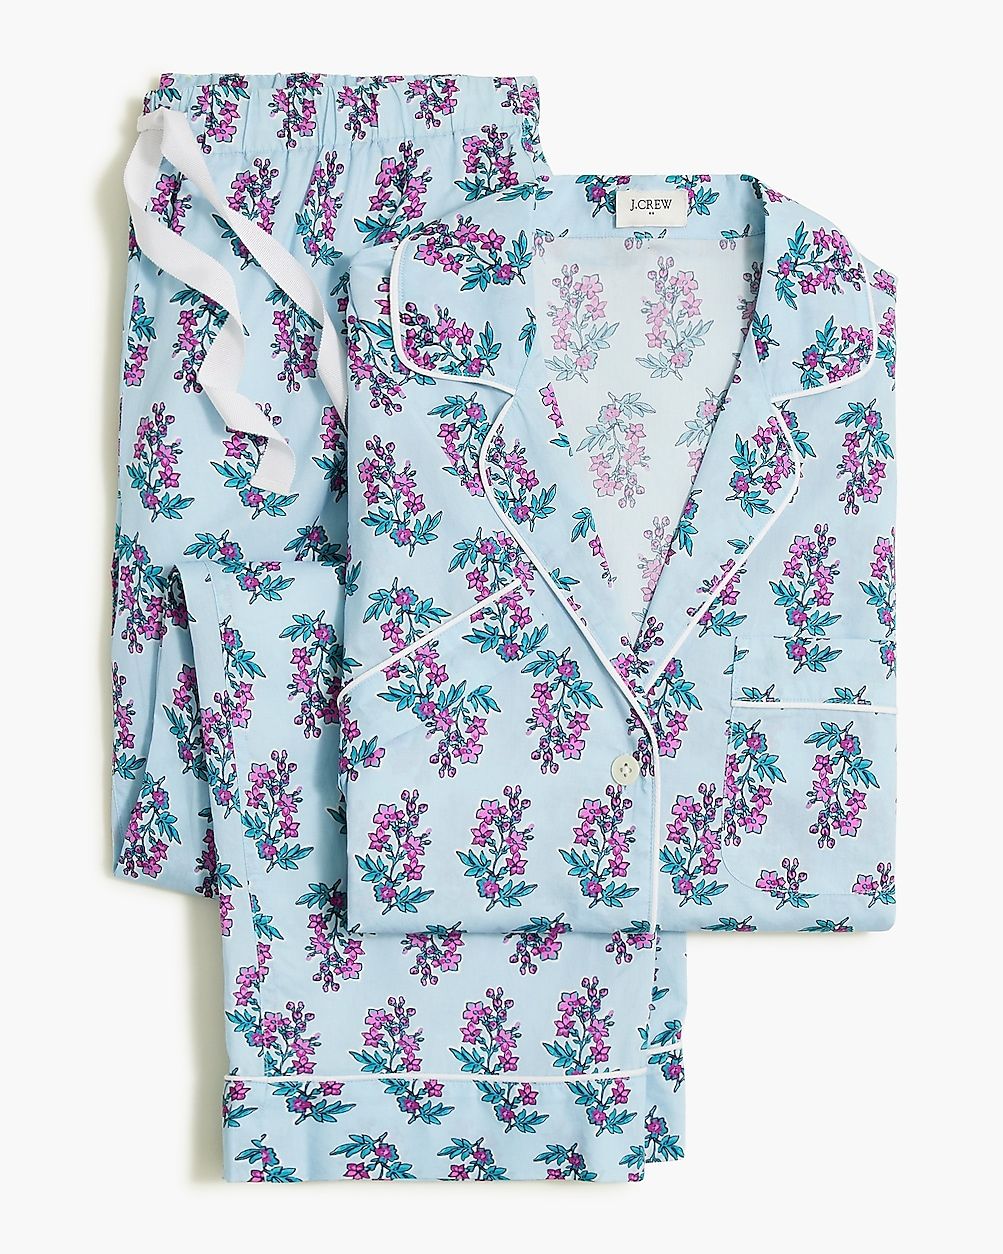 Short-sleeve pajama set with cropped pant | J.Crew Factory